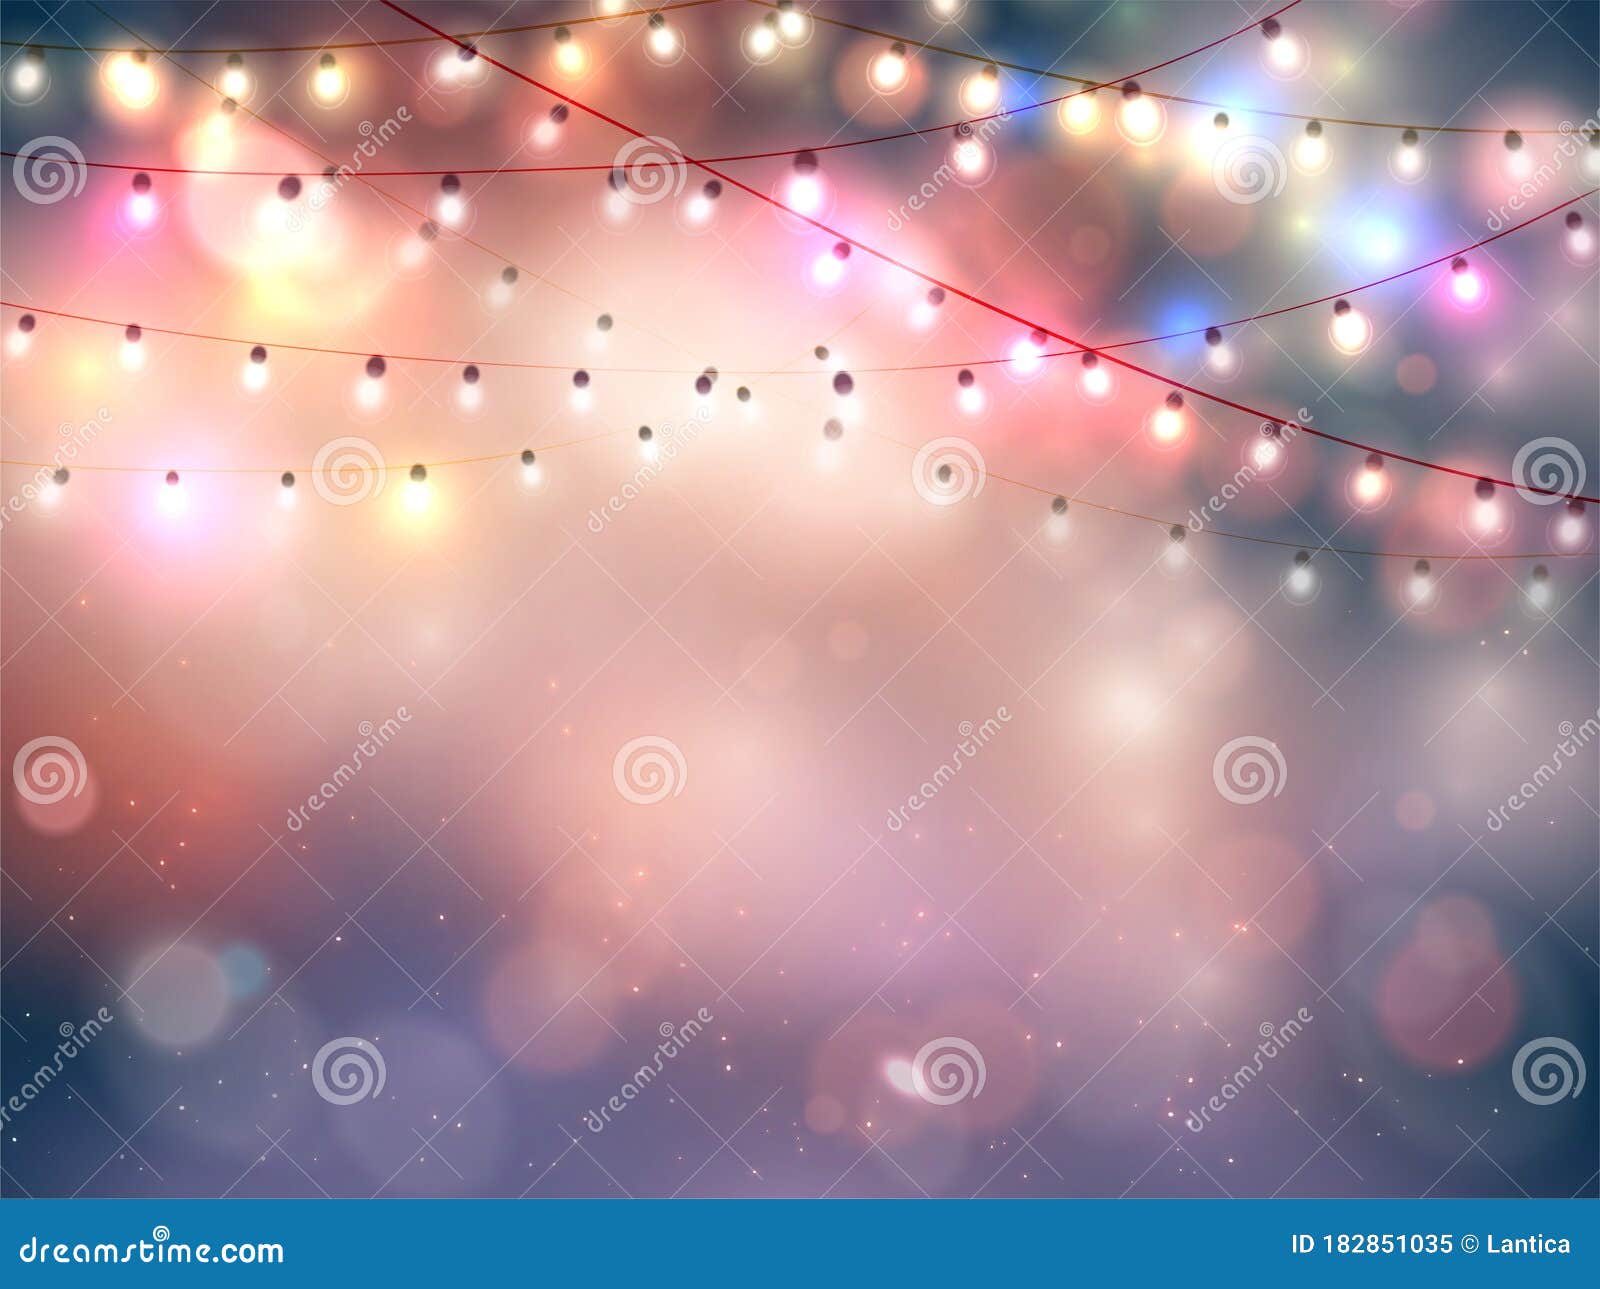 Happy New Year. Abstract Greeting Background with Bokeh, Lights and ...